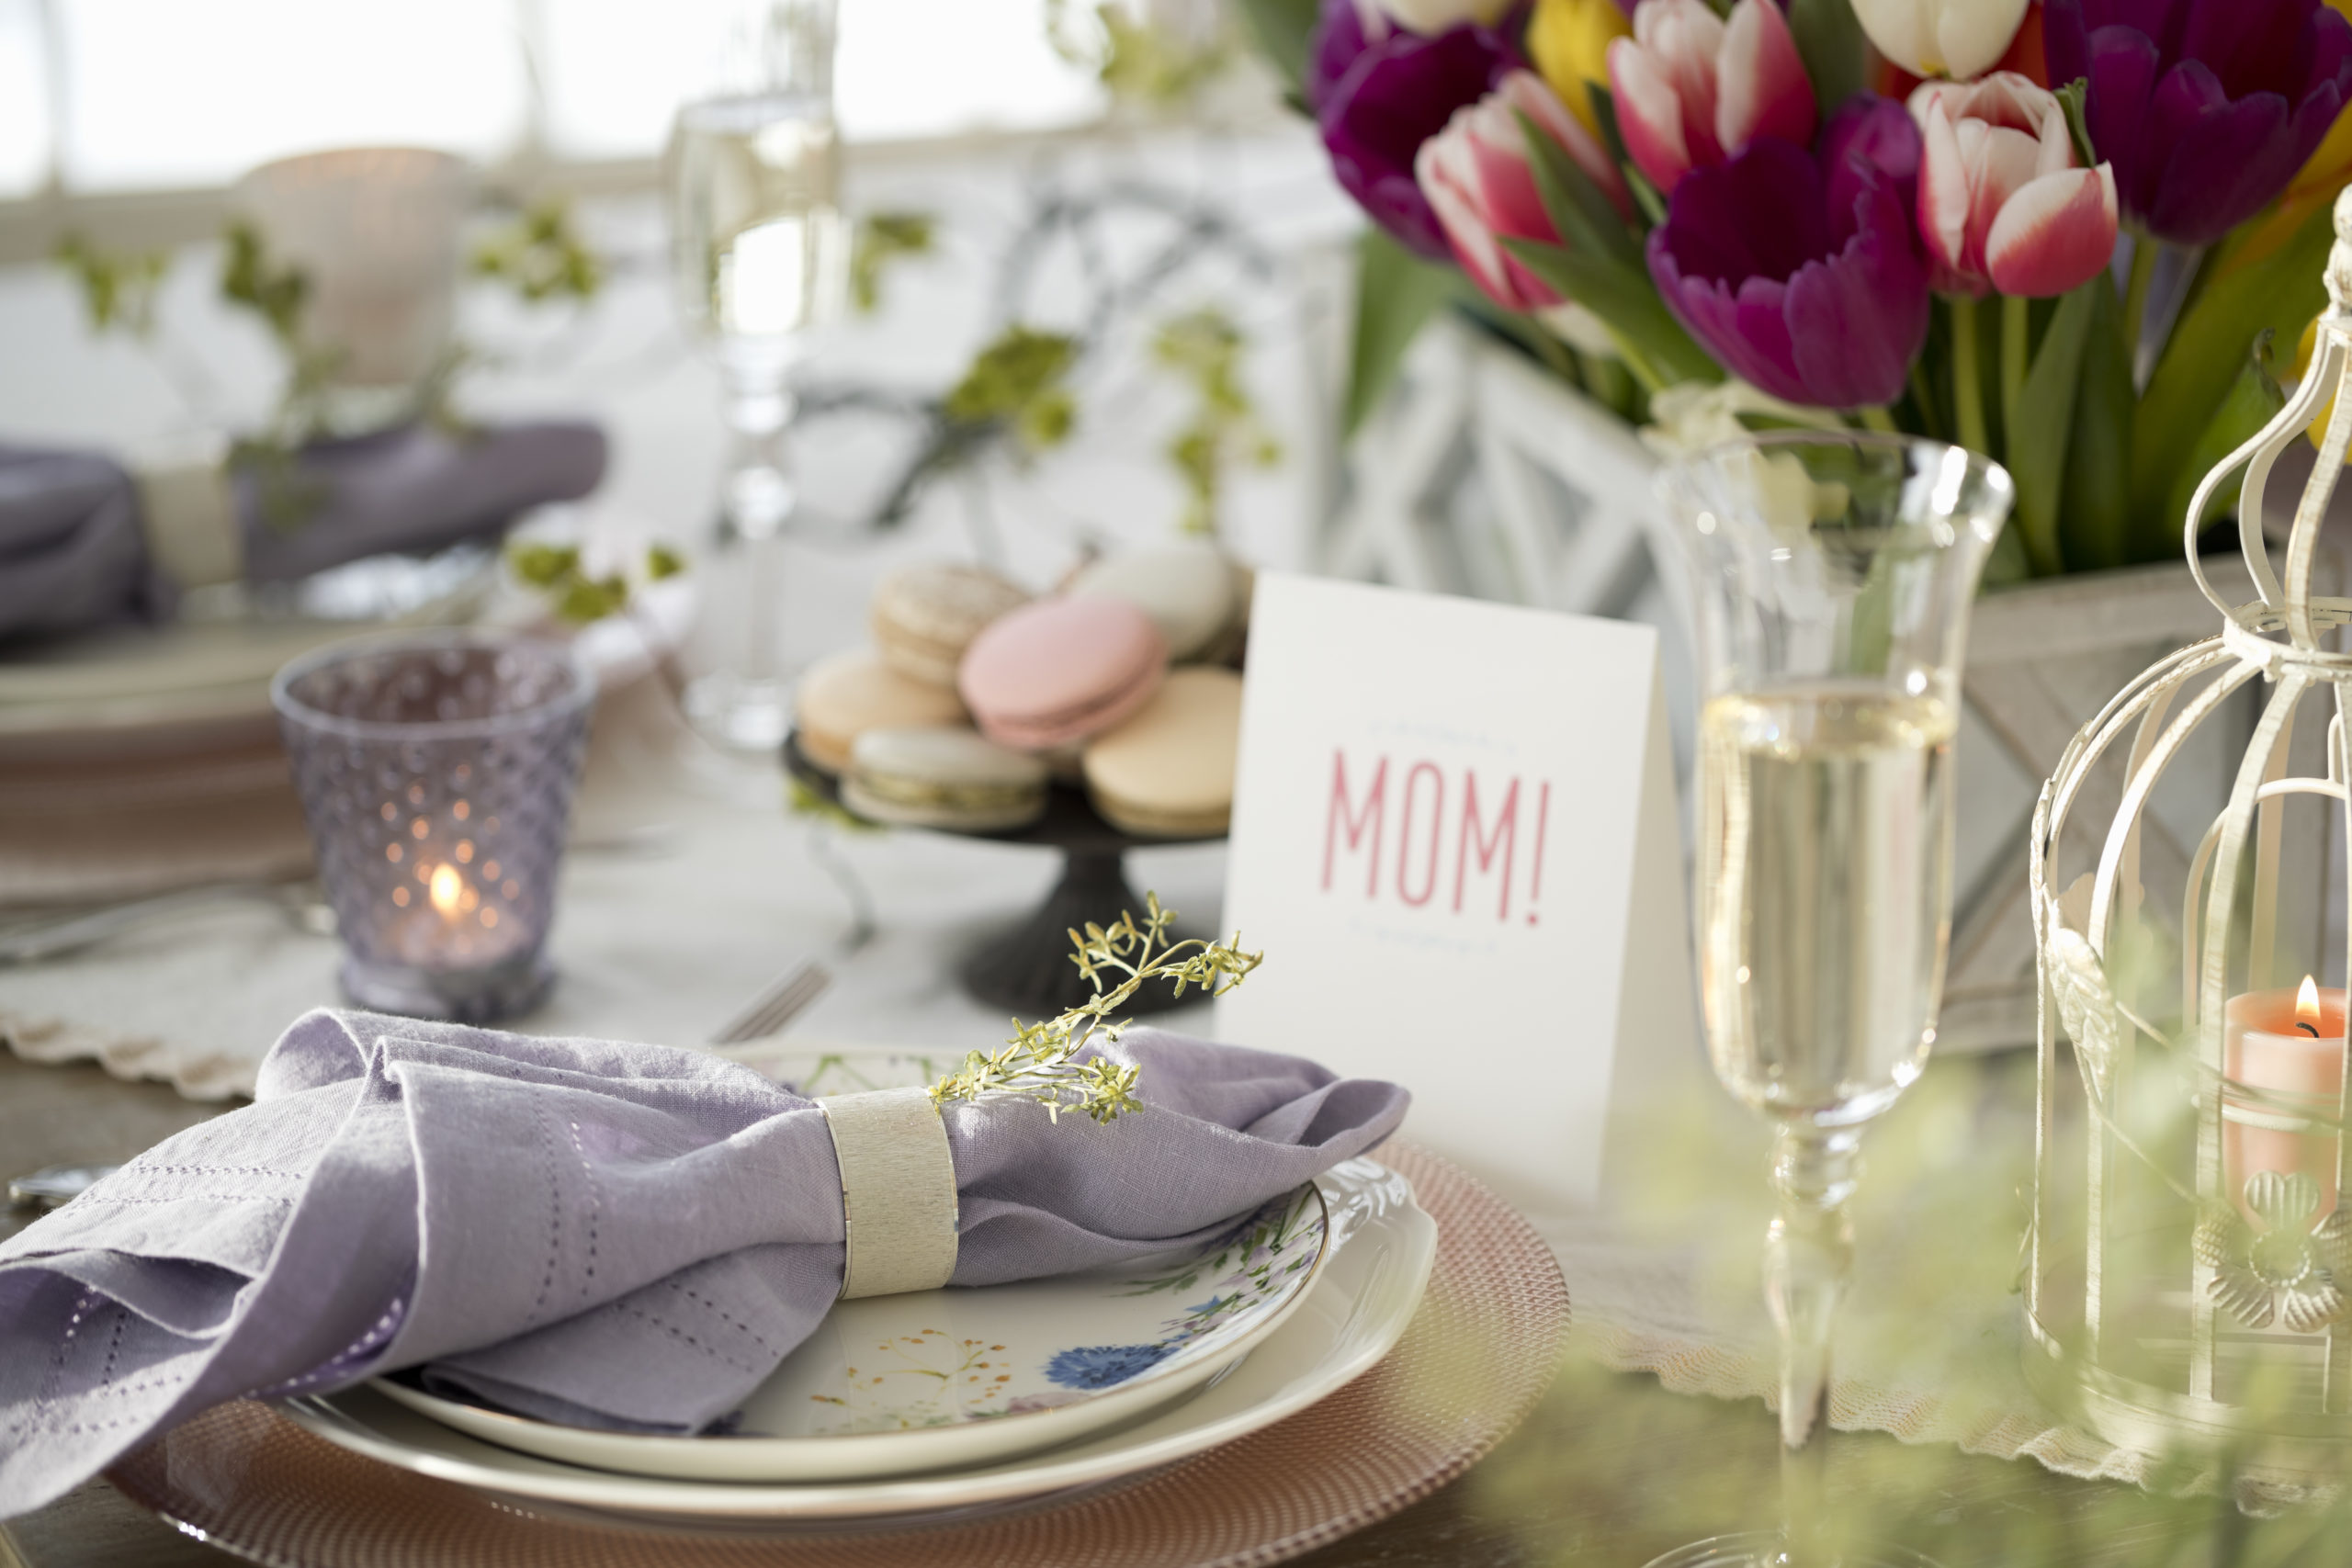 Mother's Day in Plano Texas - table setting with flowers, champagne, and MOM table sign